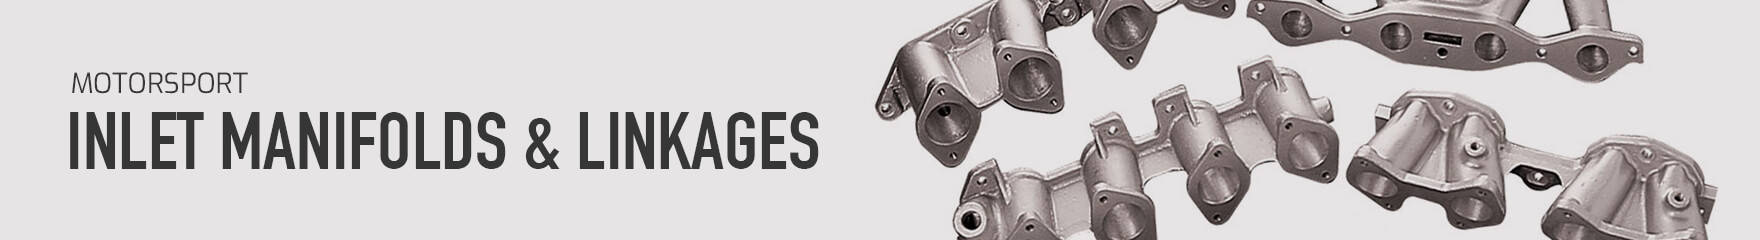 Inlet Manifolds & Linkages